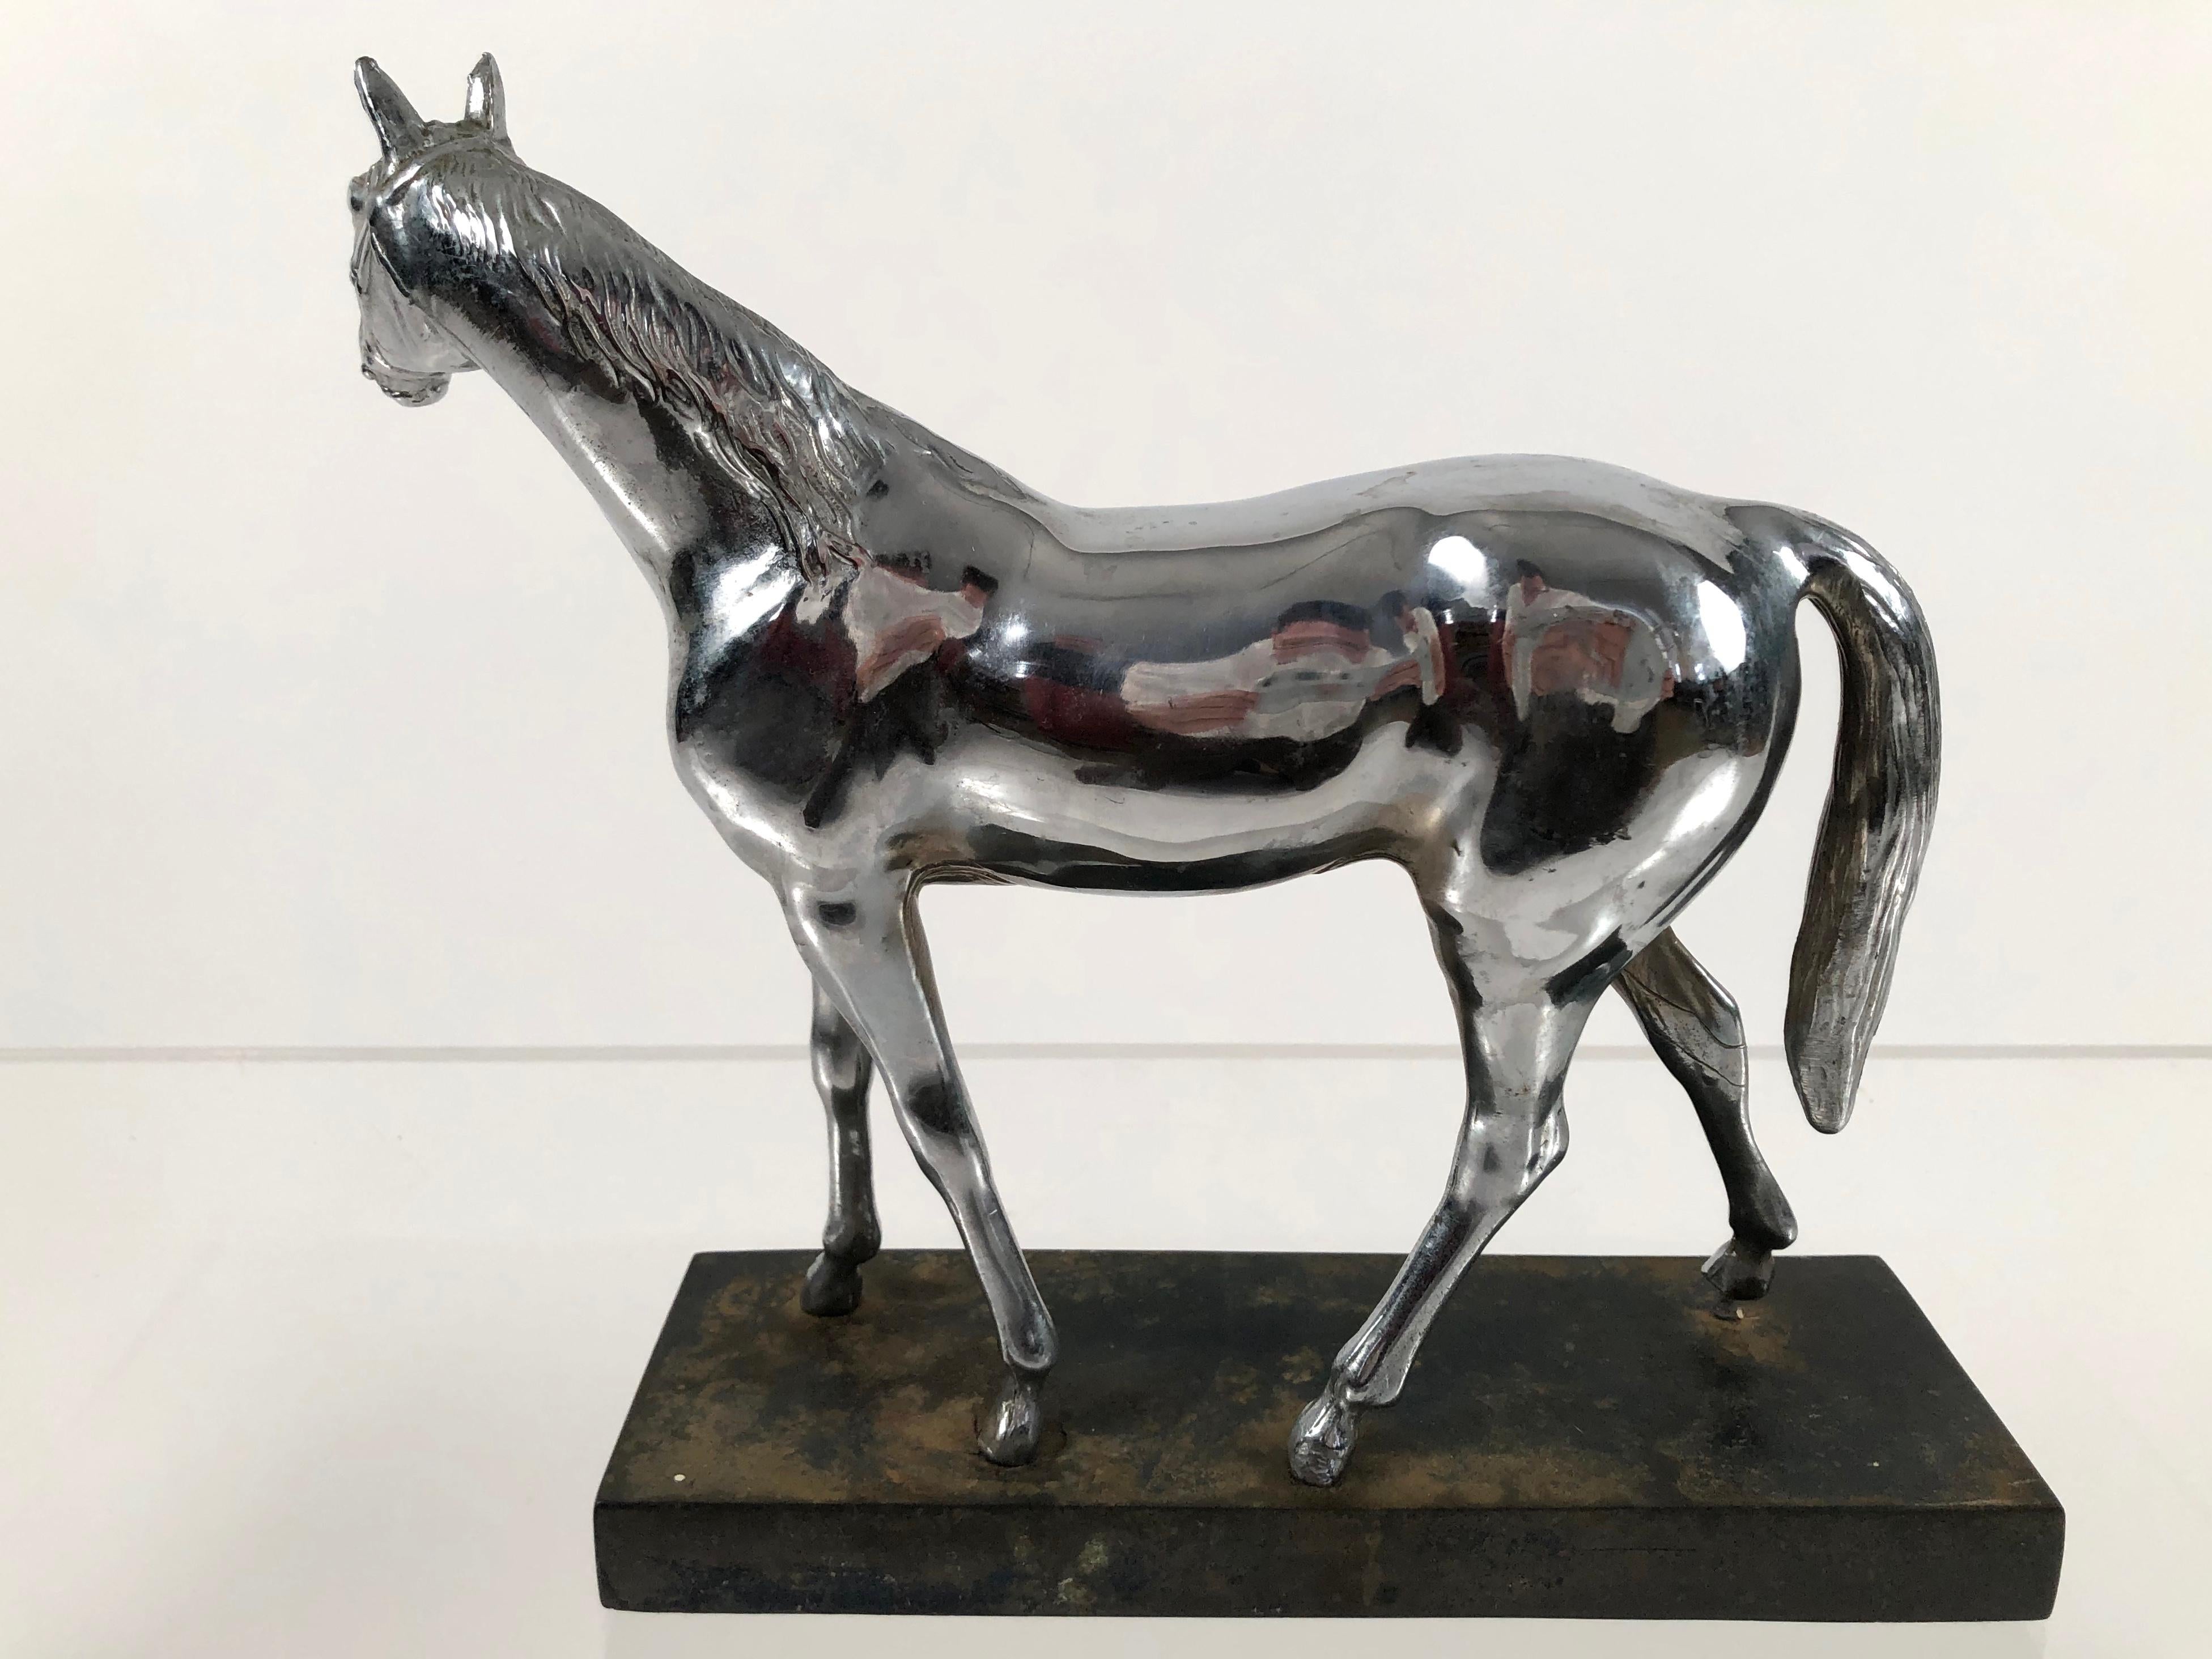 An unusual and decorative chrome-plated sculpture of an elegant horse, mounted on a metal plinth.